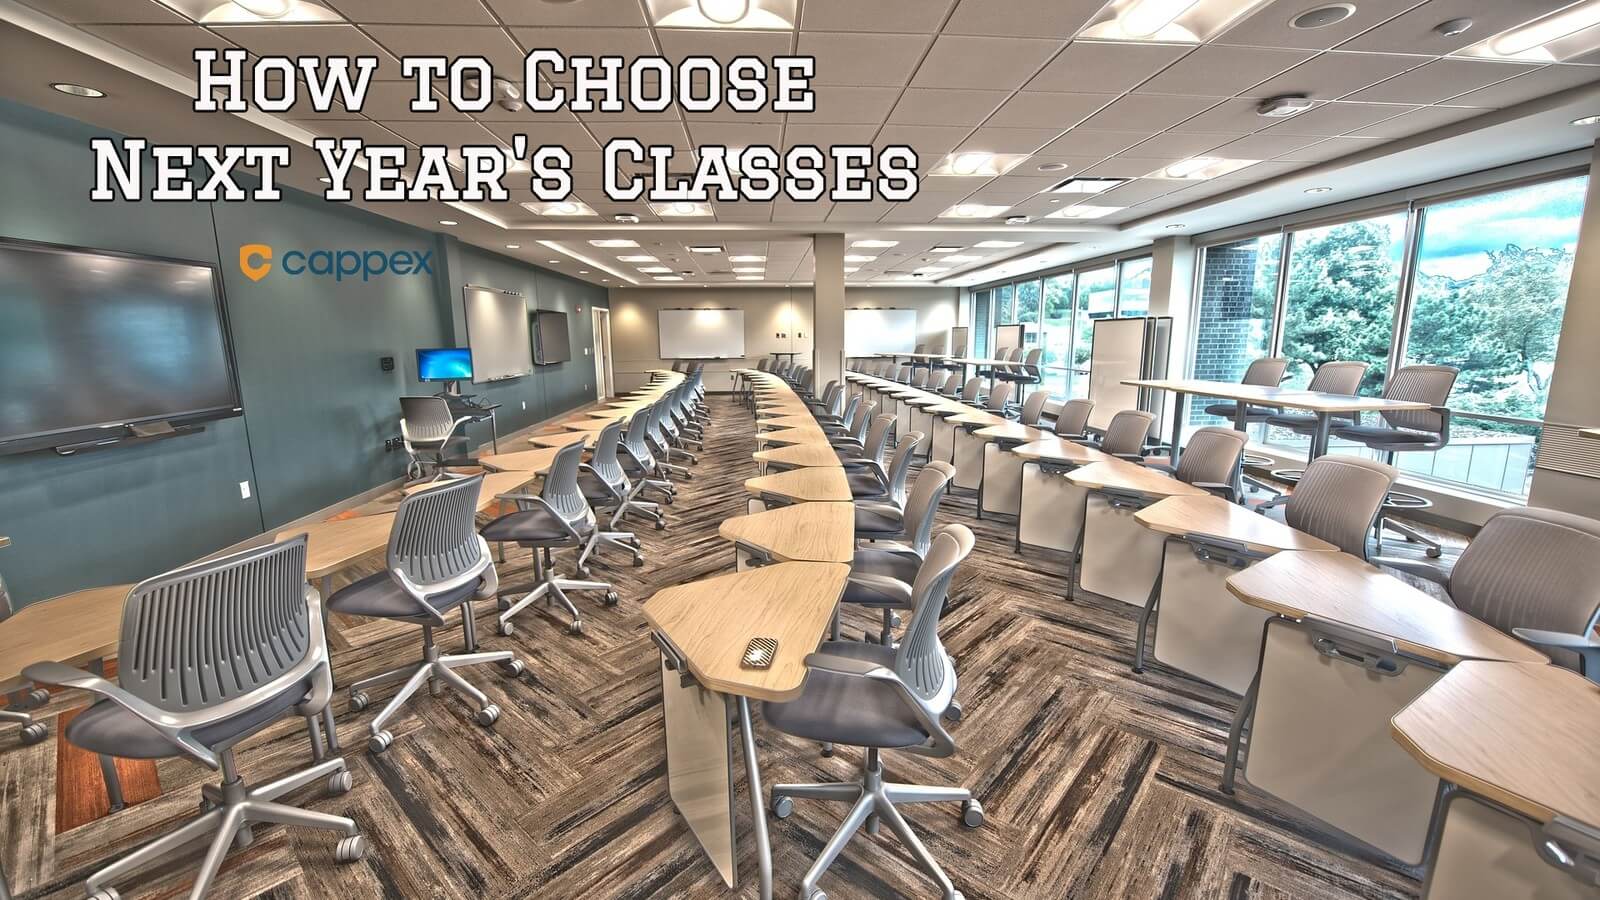 How to Choose Next Year's Classes